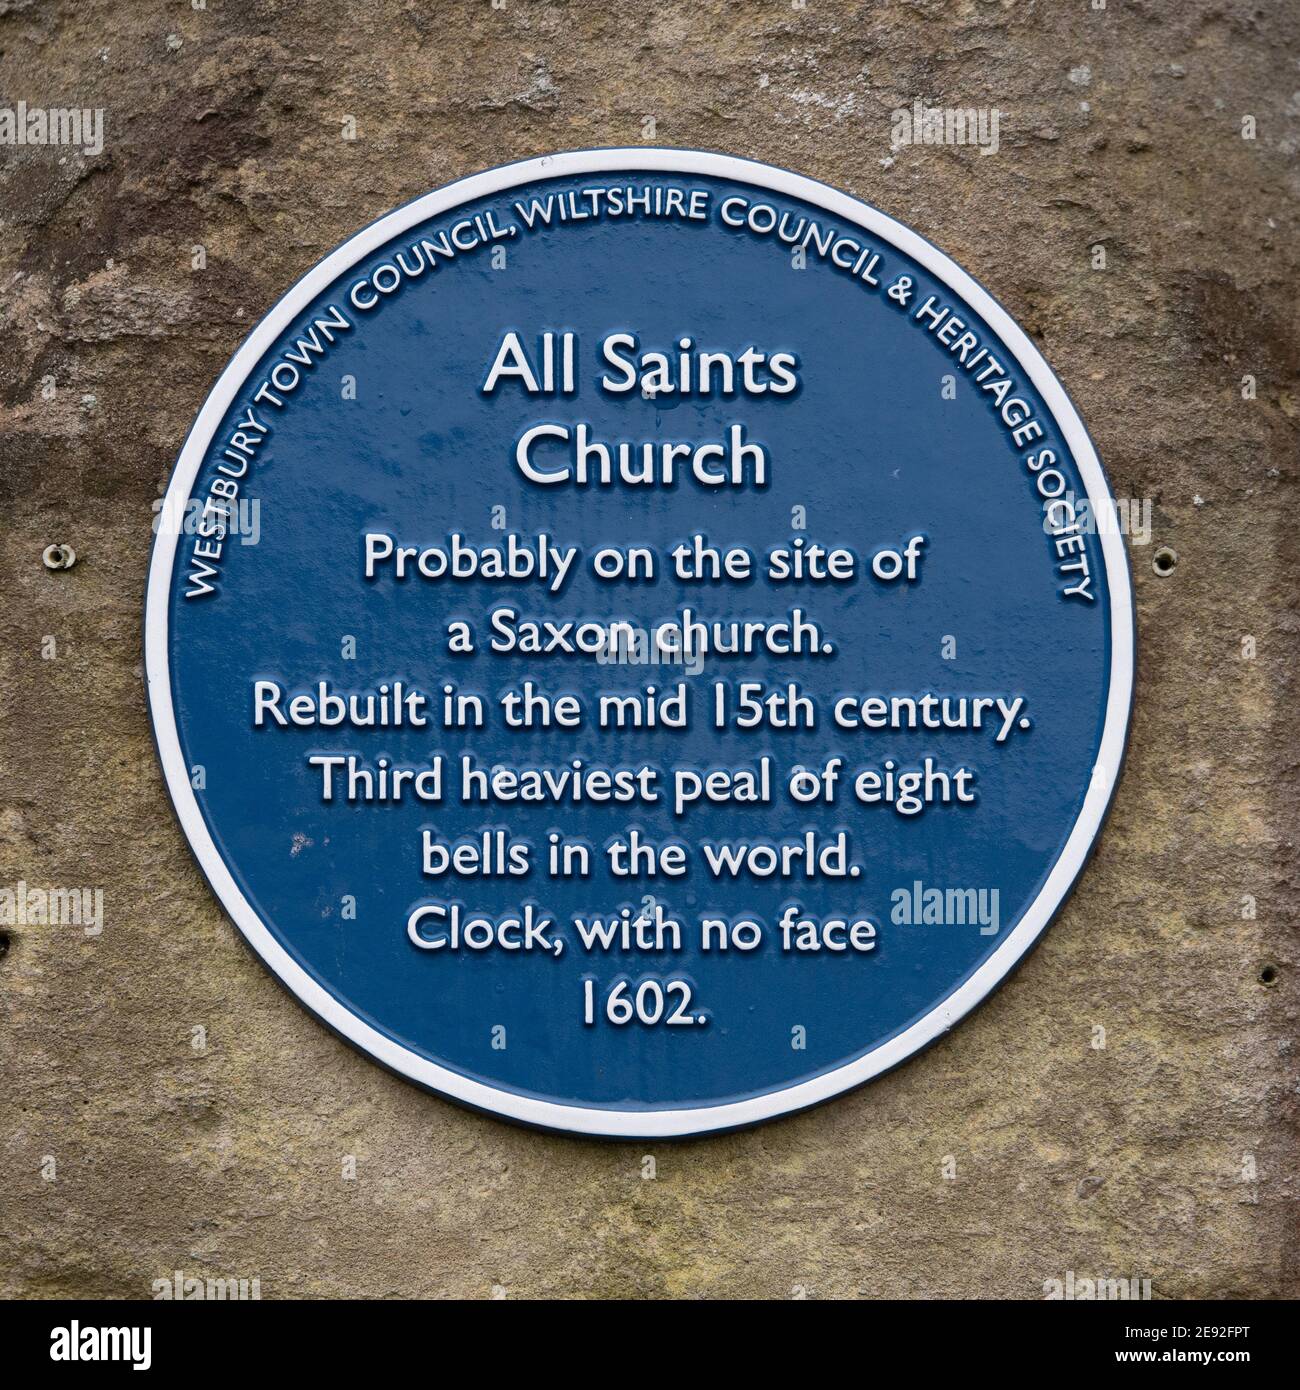 Local (Westbury, Wiltshire) blue plaque marking All Saints Church, probably on the site of a Saxon church. Stock Photo